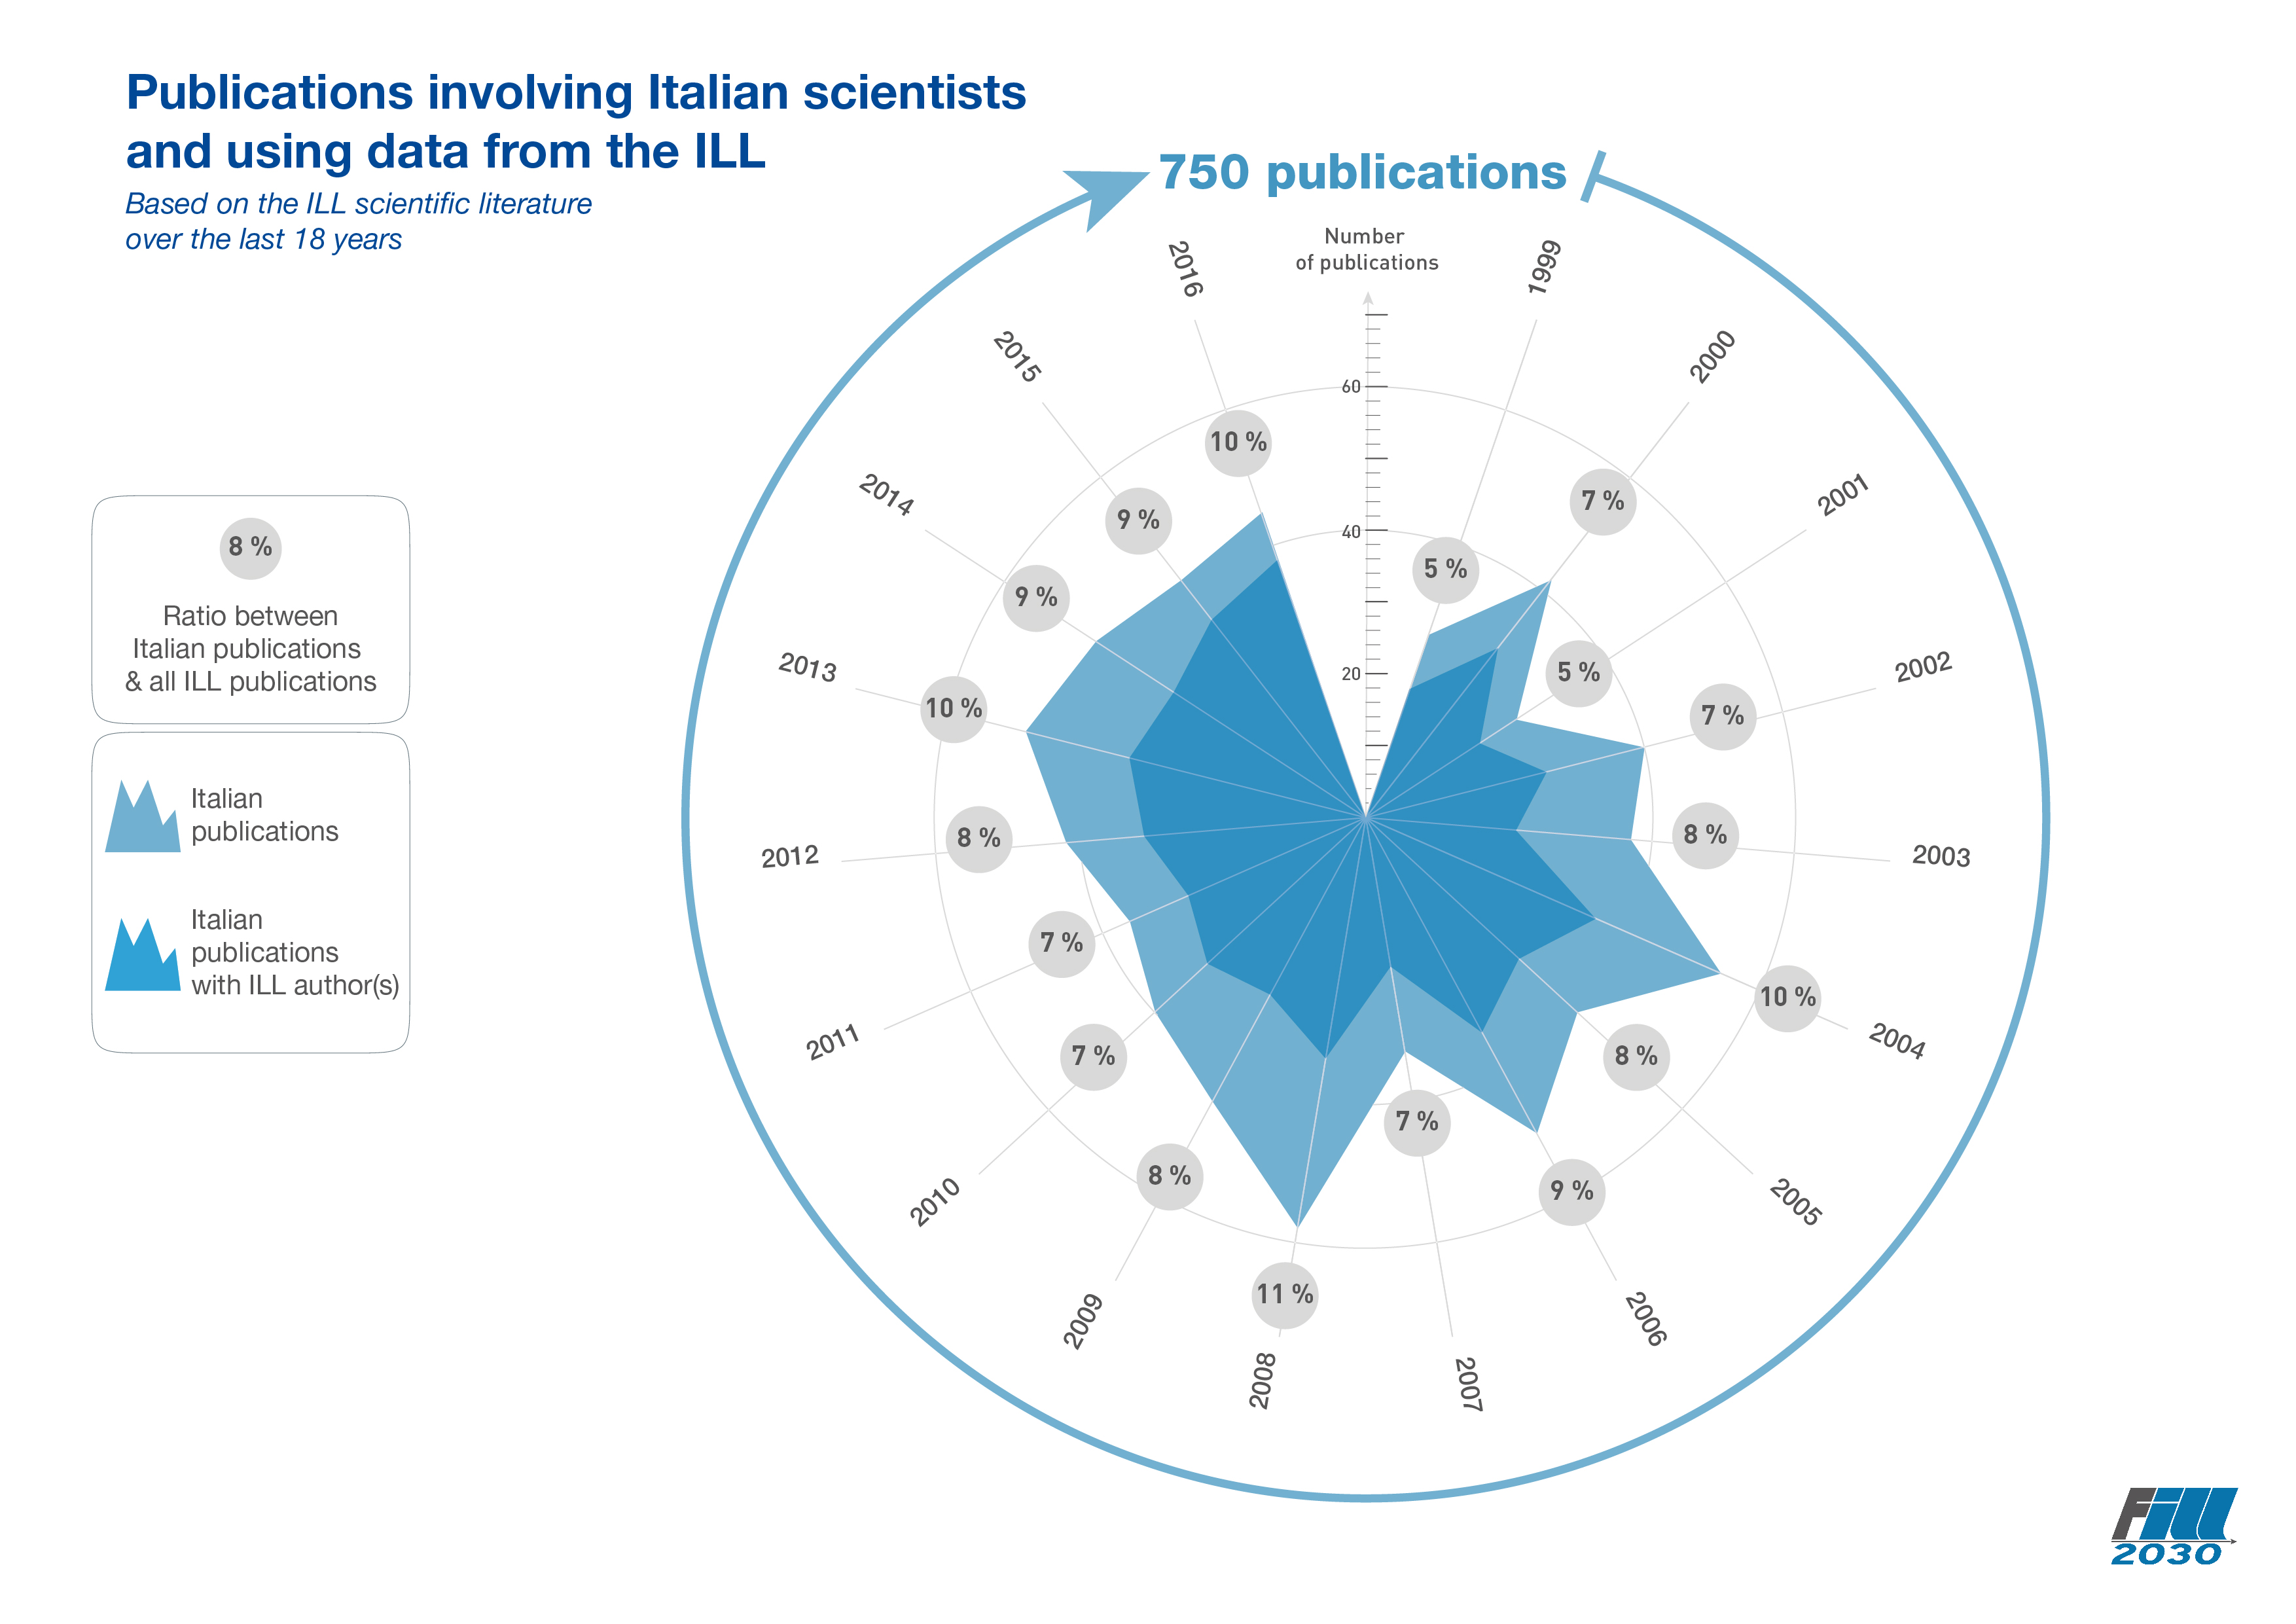 Publications involving Italian scientists and using data from the ILL